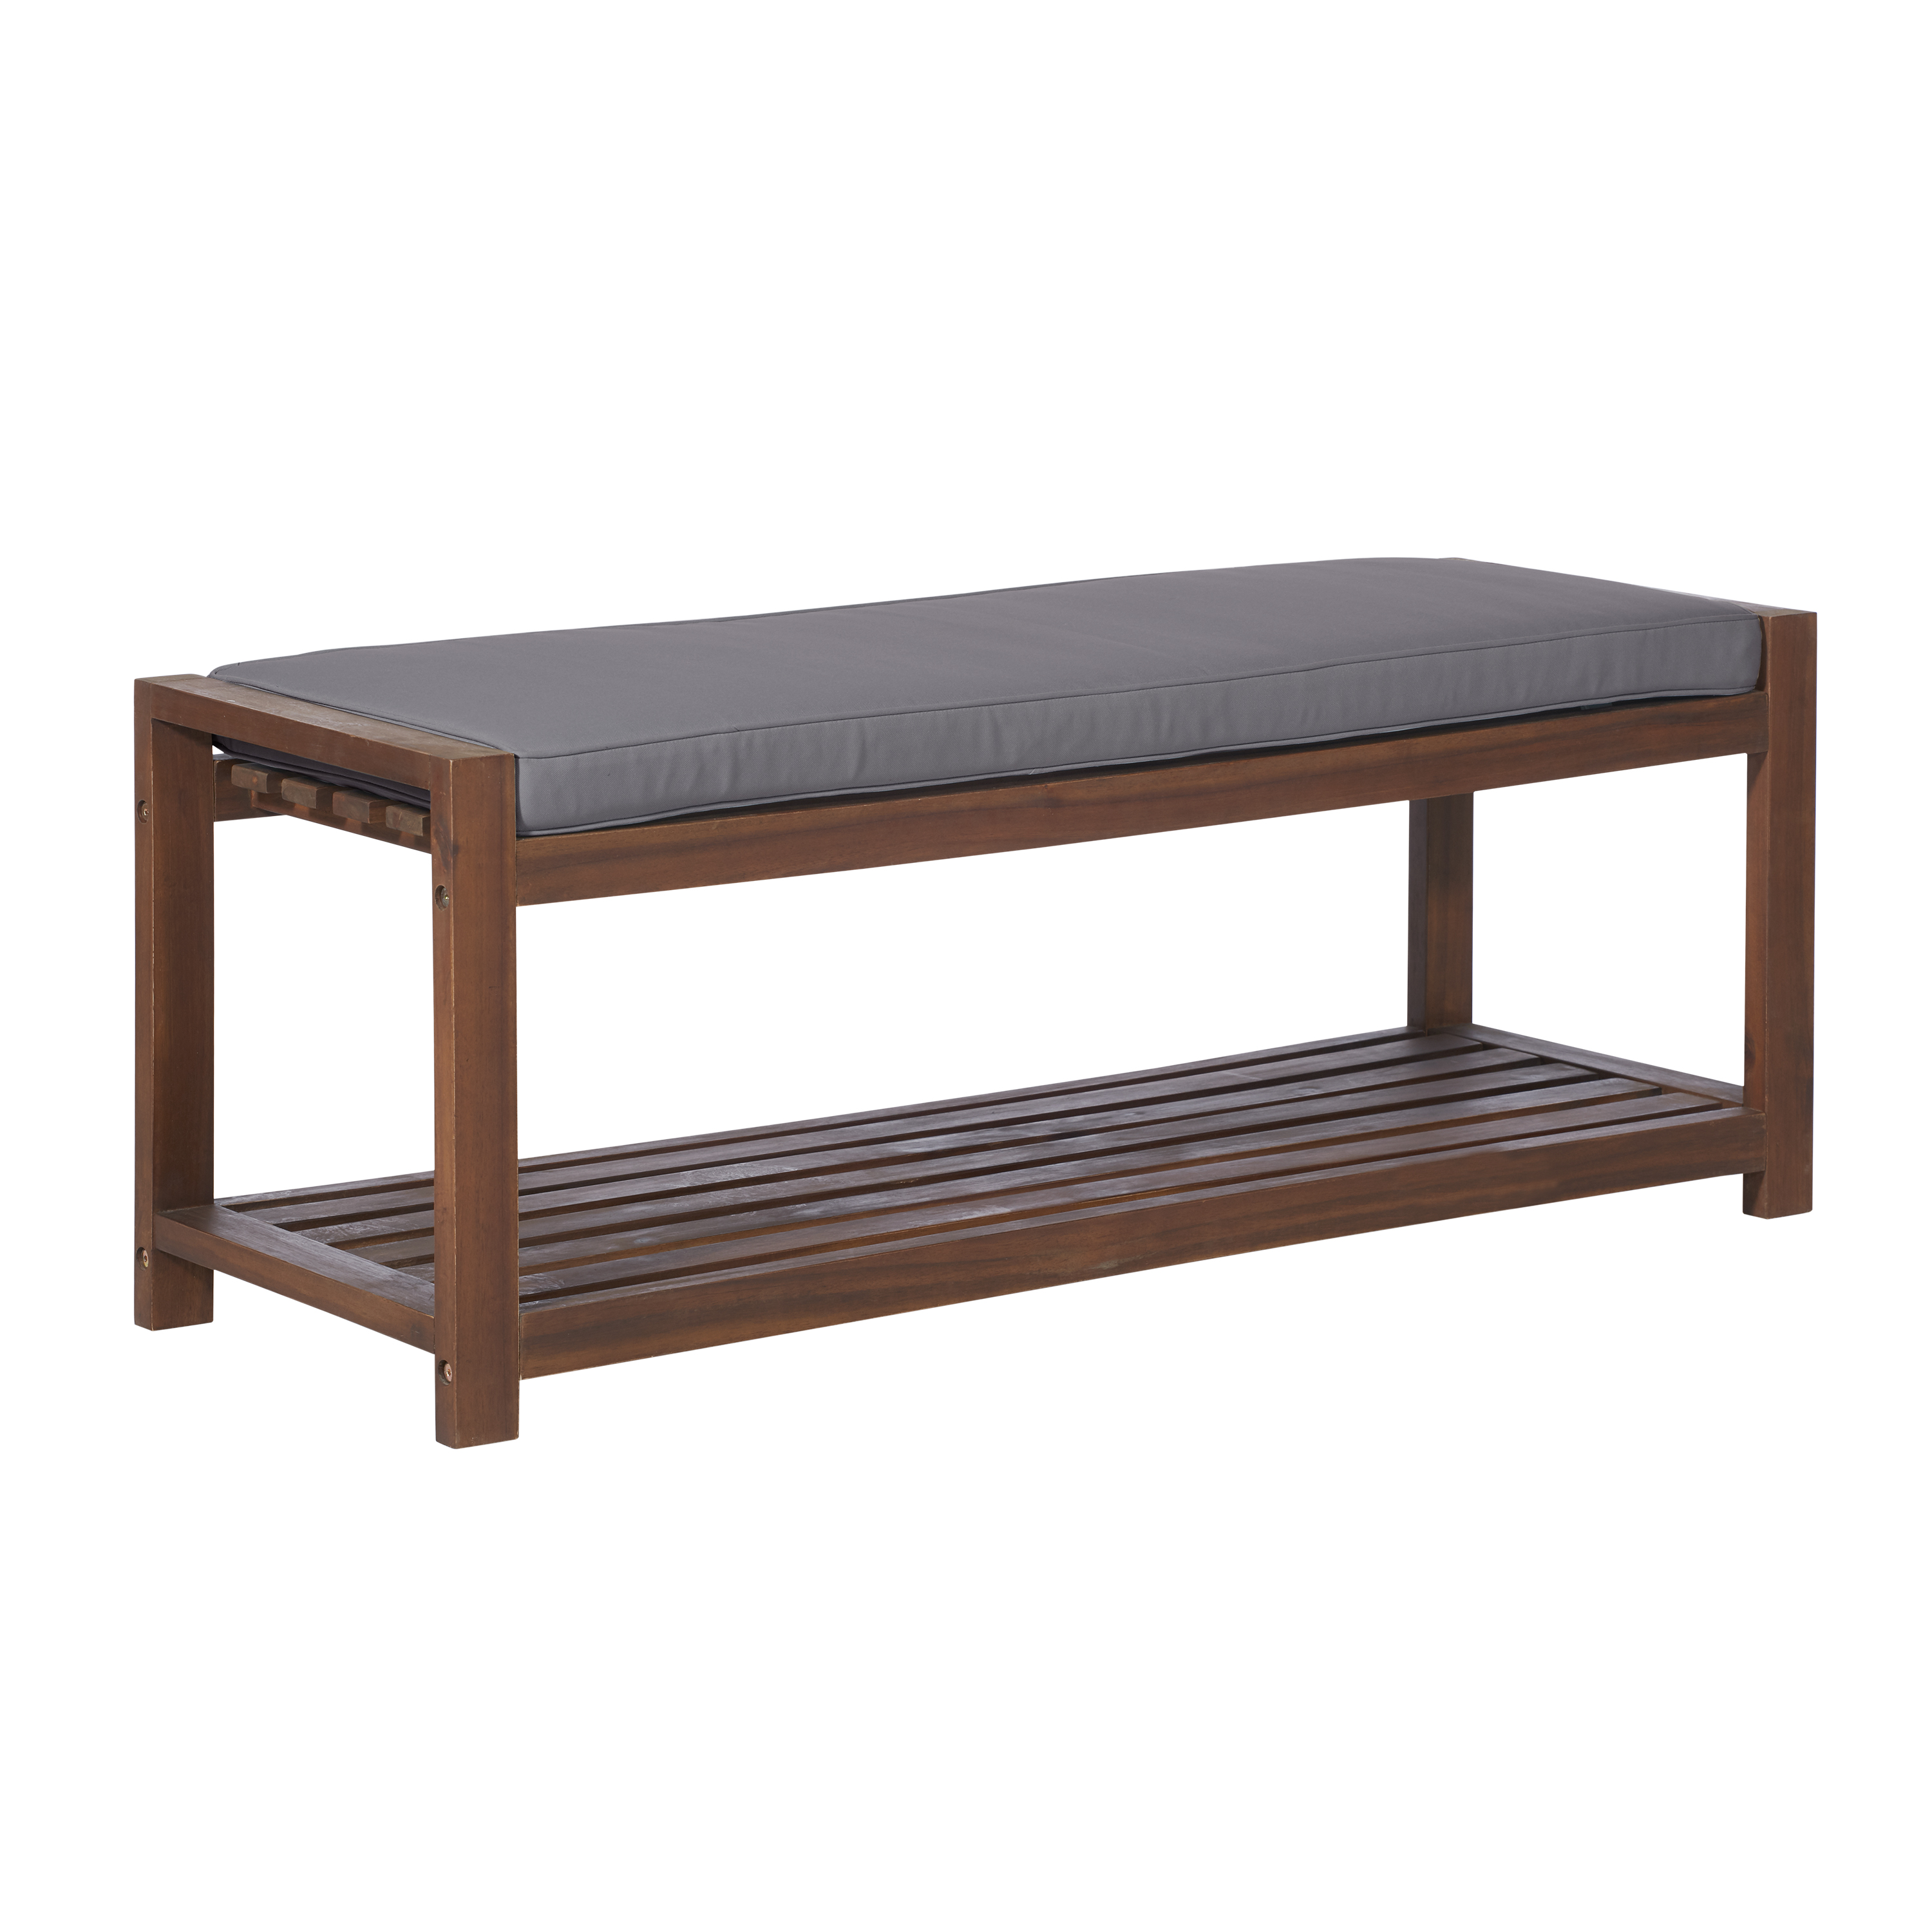 Manor Park Outdoor Patio Wood Bench with Cushion, Dark Brown/Grey - image 2 of 6